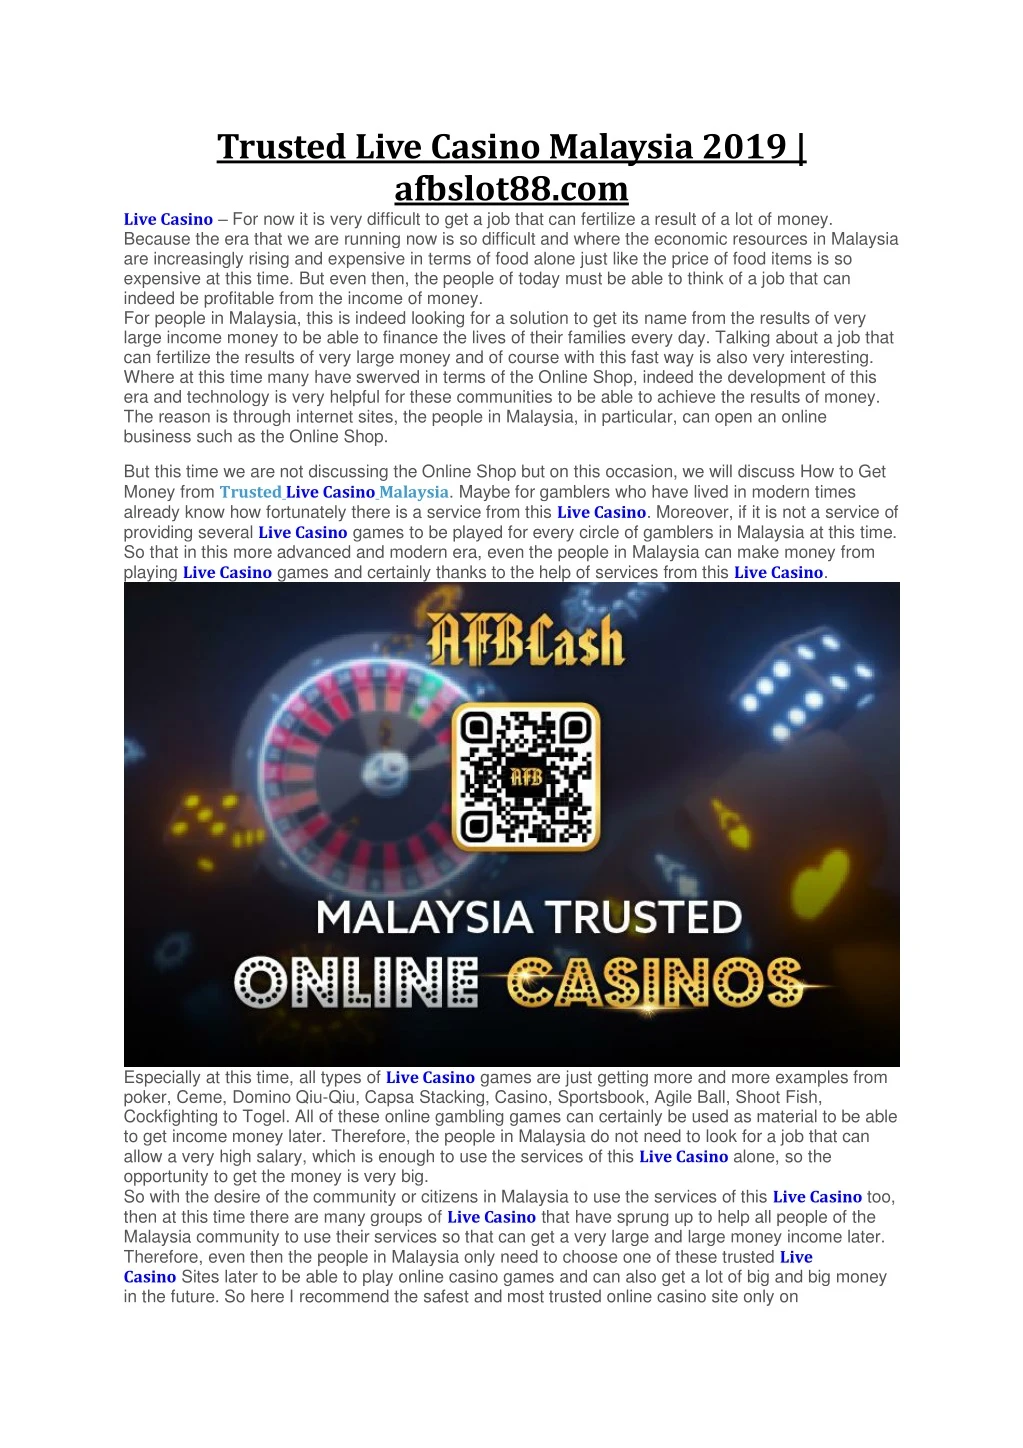 trusted live casino malaysia 2019 afbslot88